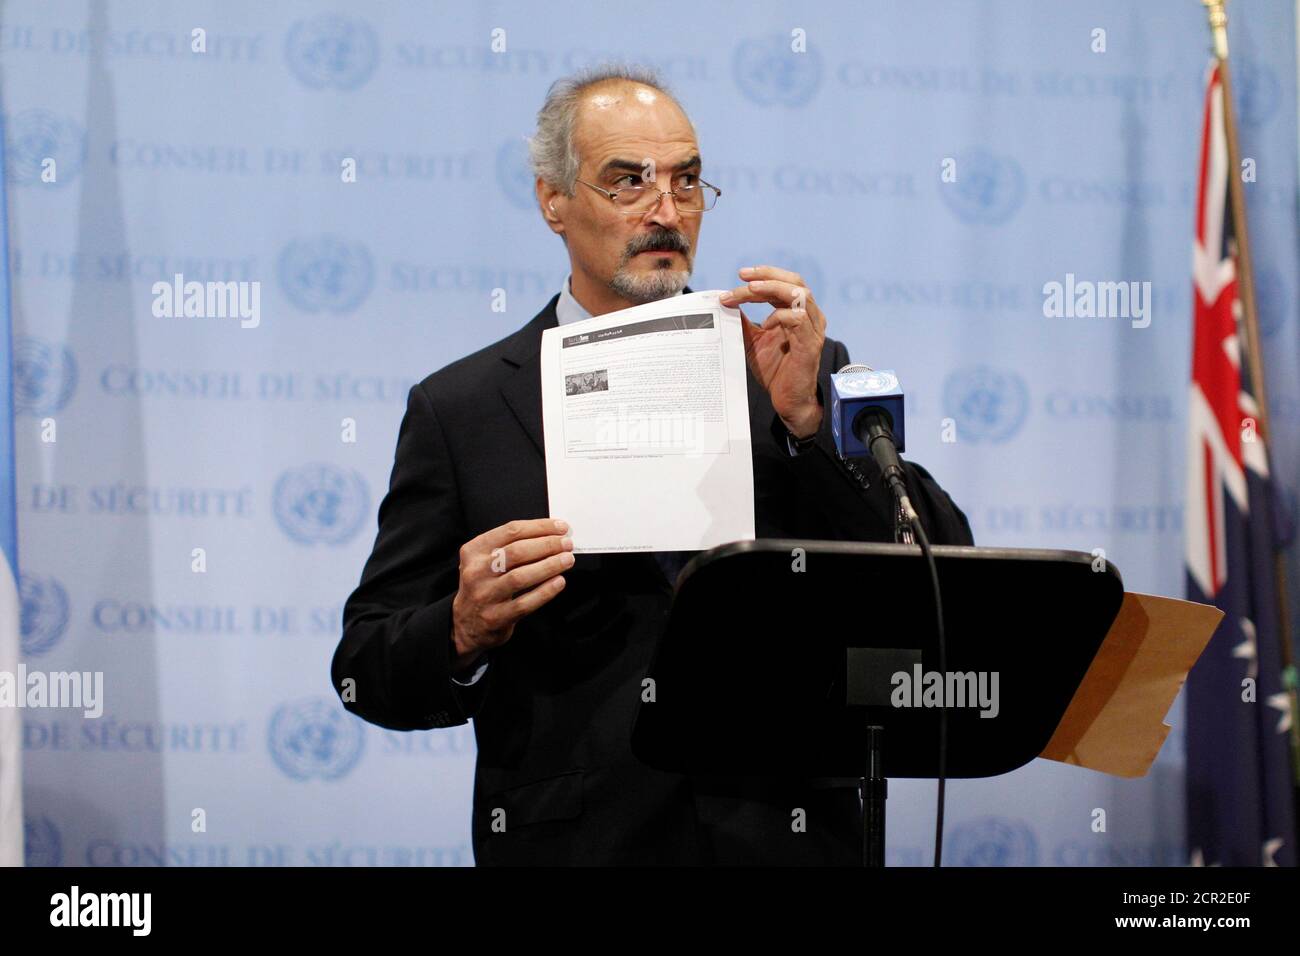 Syrian U.N. Ambassador Bashar Ja'afari shows a document to reporters at the United Nations Headquarters in New York, September 12, 2013. Syria became a full member of the global anti-chemical weapons treaty on Thursday, Ja'afari said, a move that the government of Syrian President Bashar al-Assad had promised as part of a deal to avoid U.S. air strikes.   REUTERS/Brendan McDermid (UNITED STATES - Tags: POLITICS TPX IMAGES OF THE DAY) Stock Photo